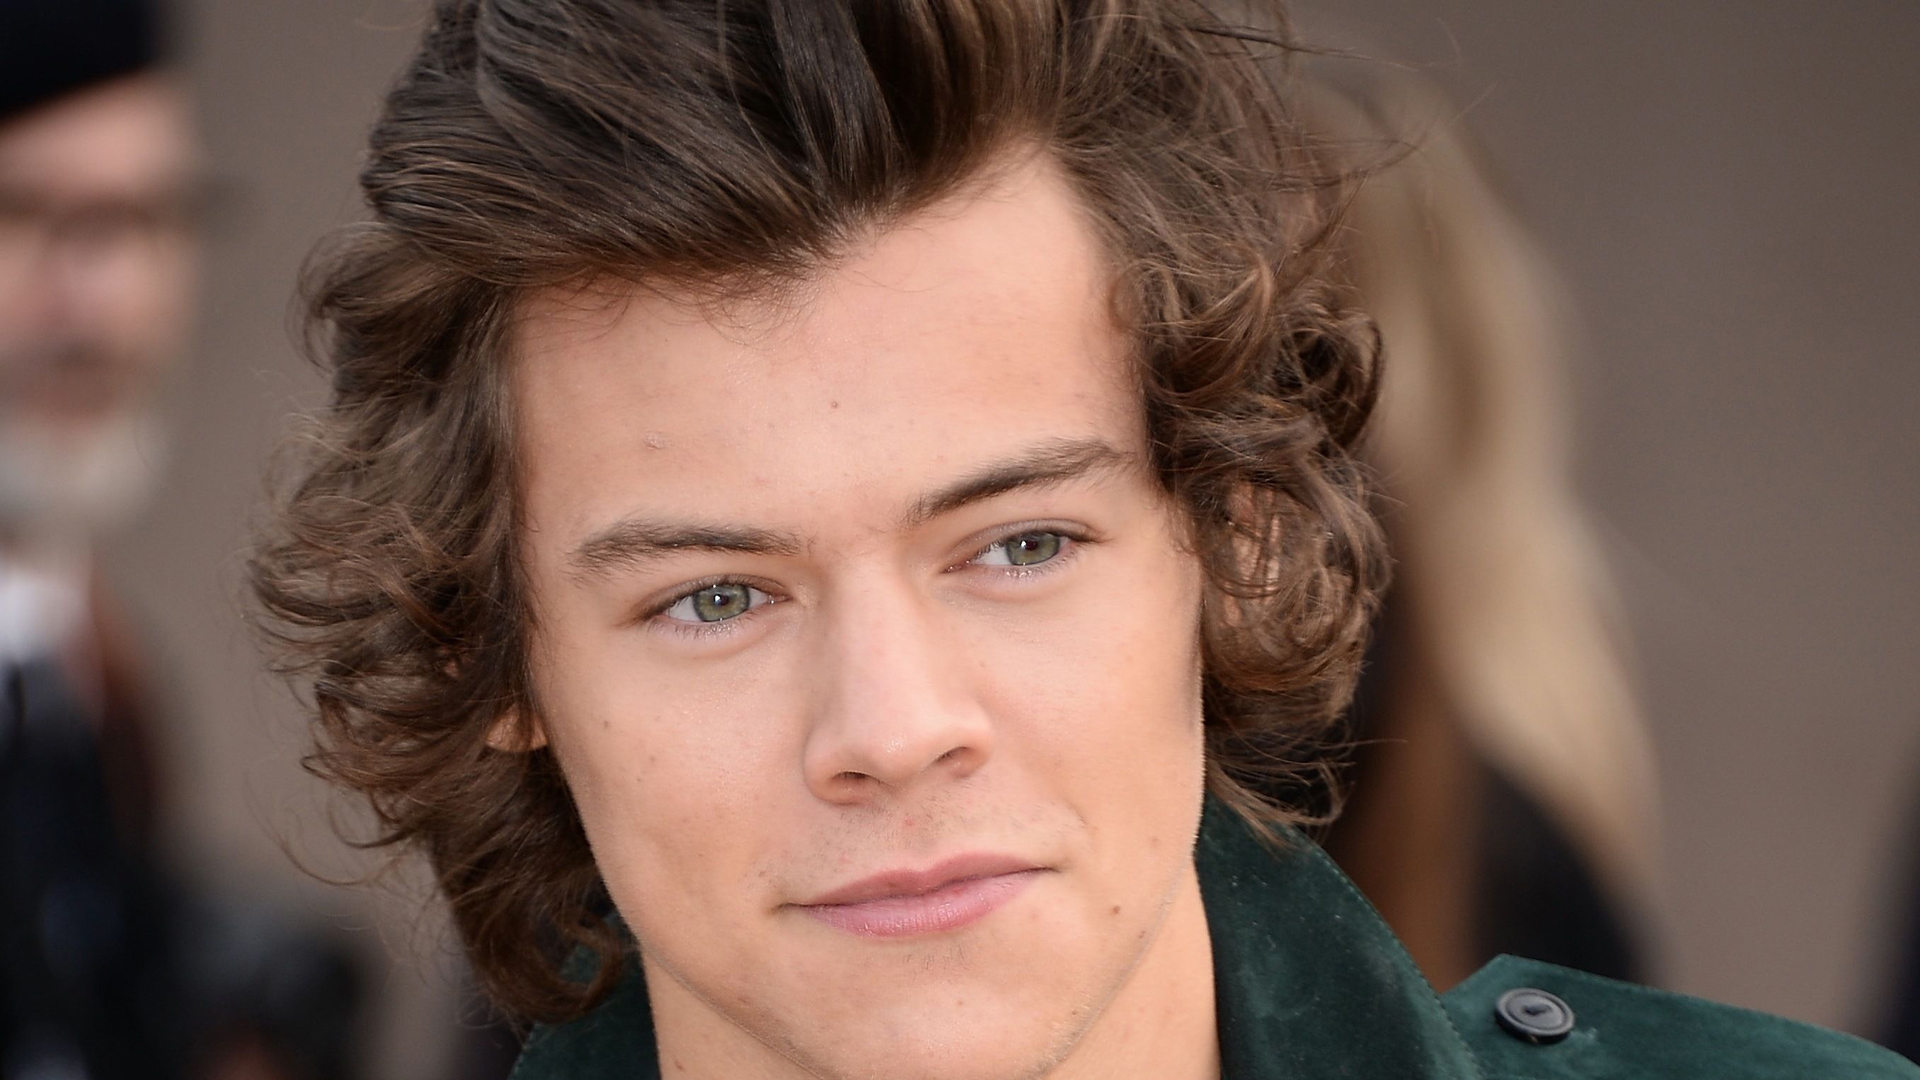 Smart Look Of Harry Styles With Closeup View HD Harry Styles